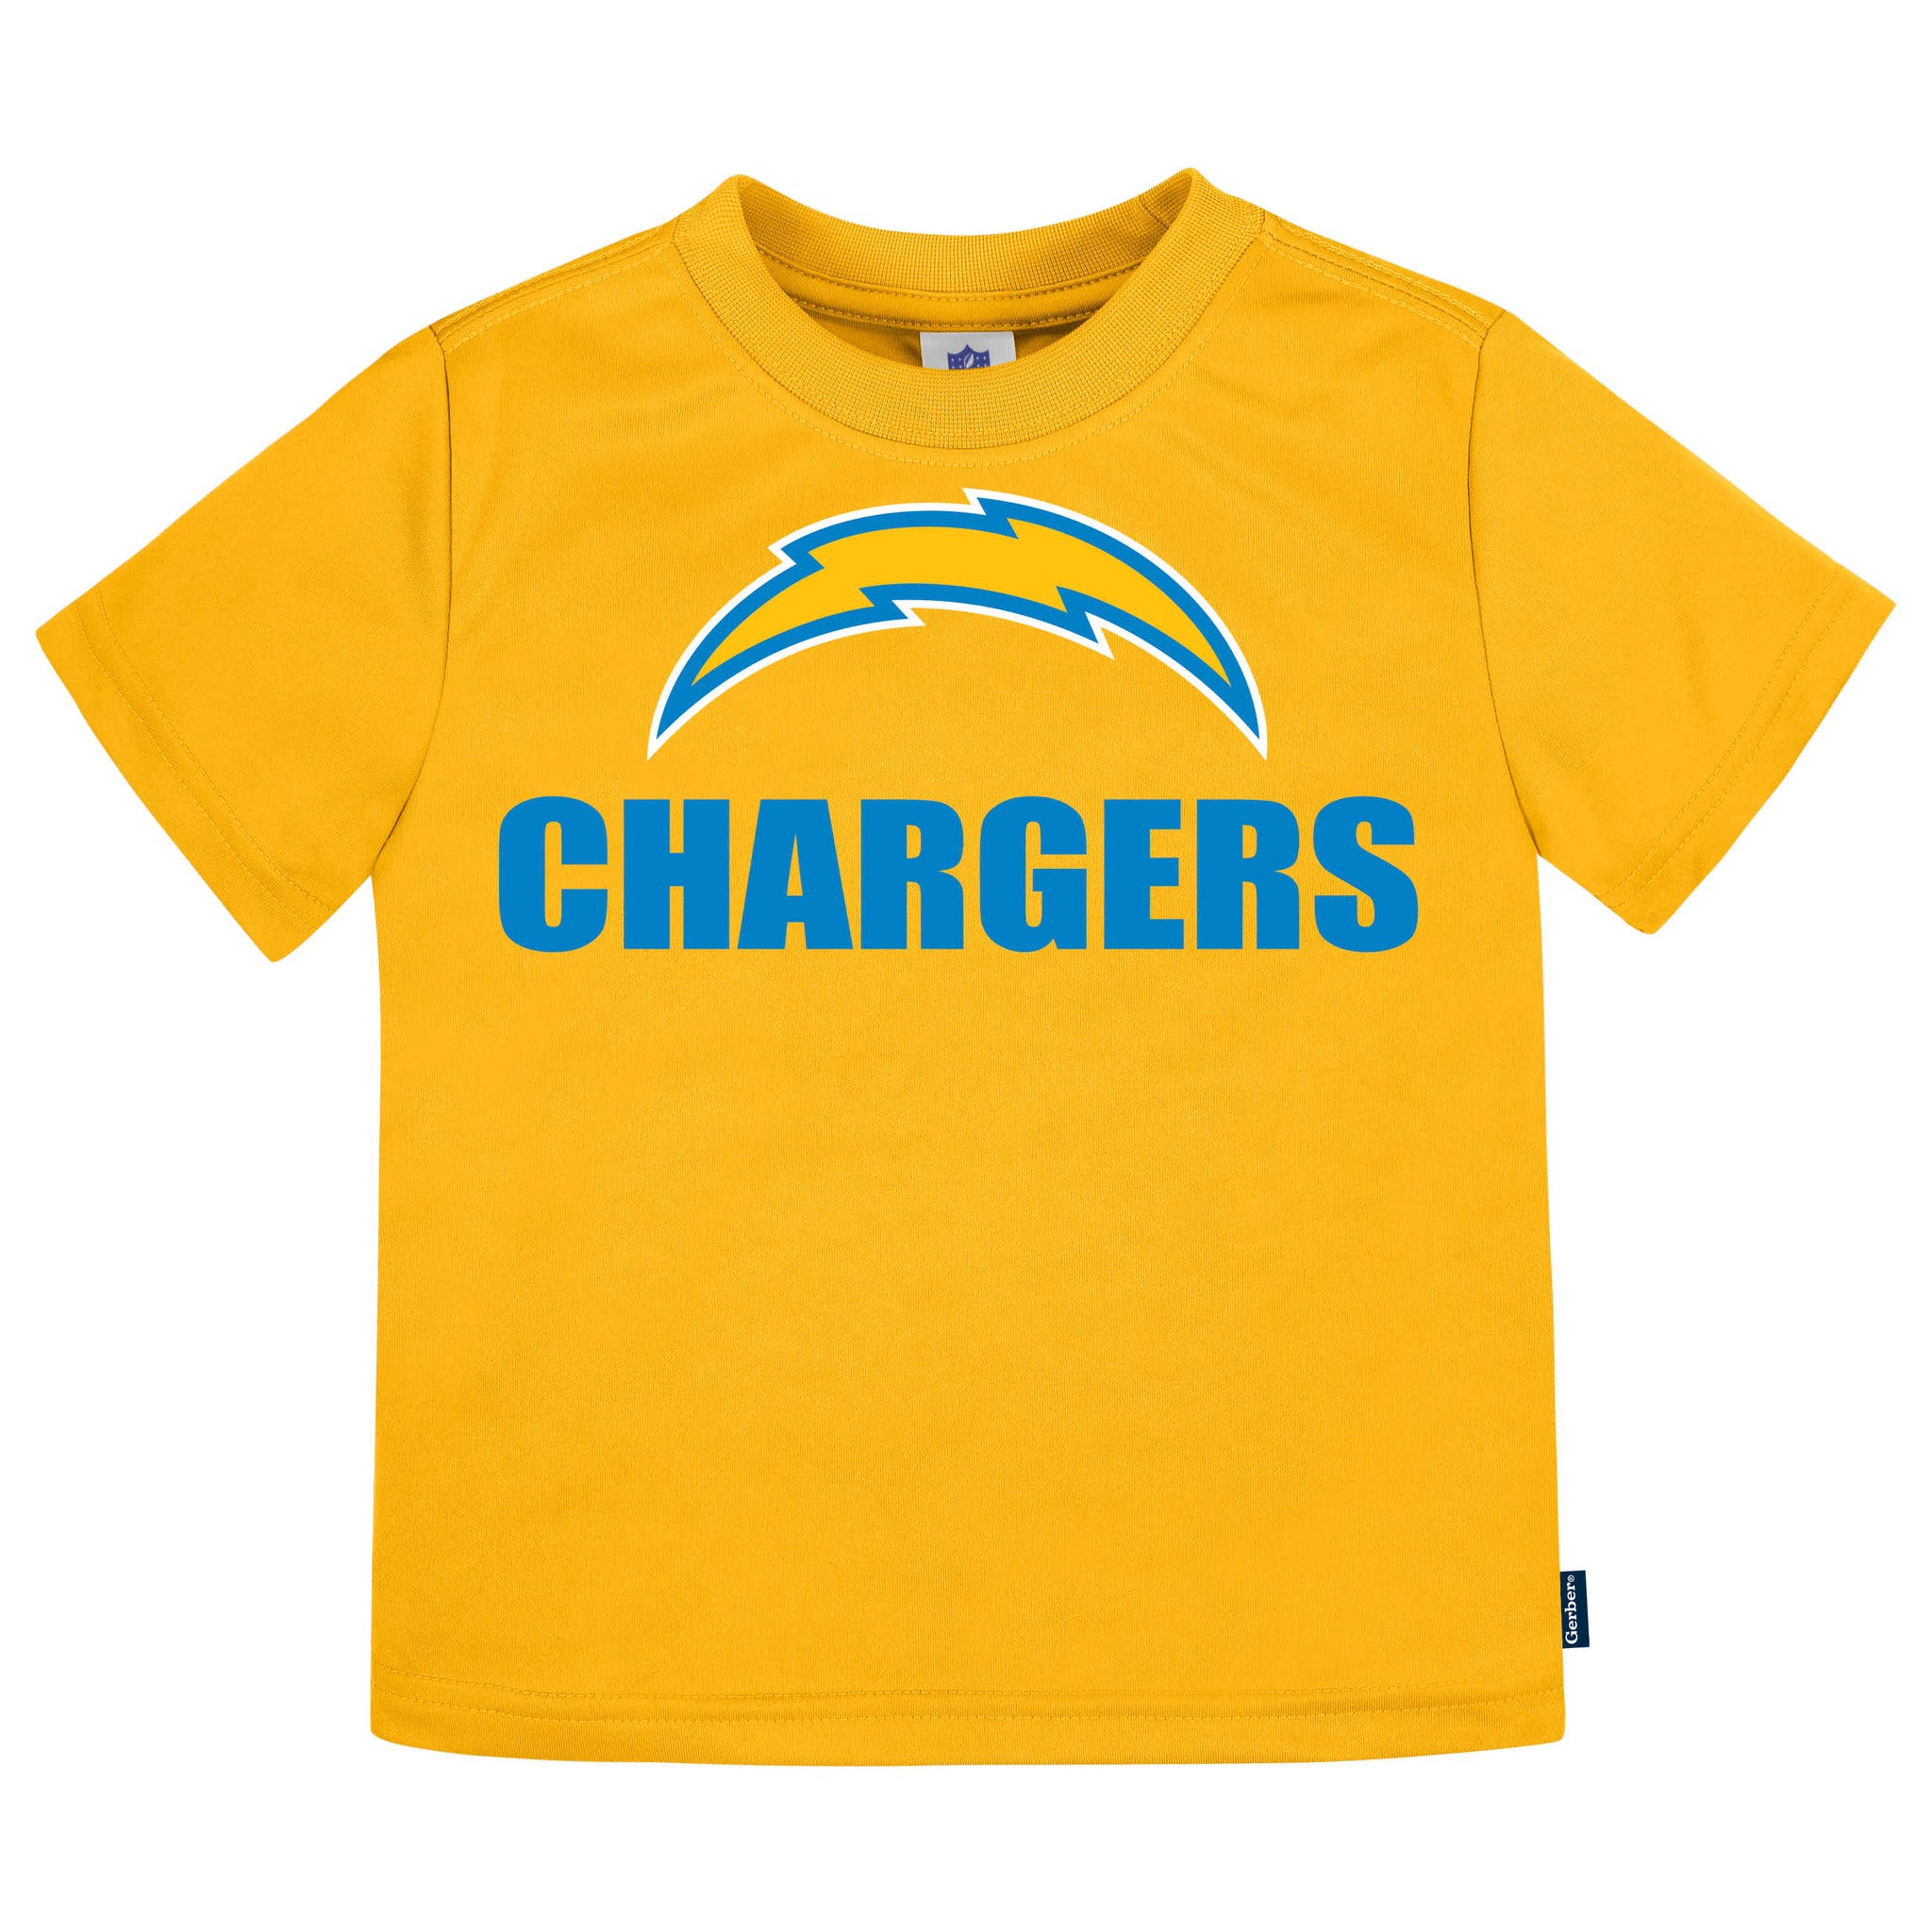 3-Pack Infant & Toddler Boys Chargers Short Sleeve Tees-Gerber Childrenswear Wholesale